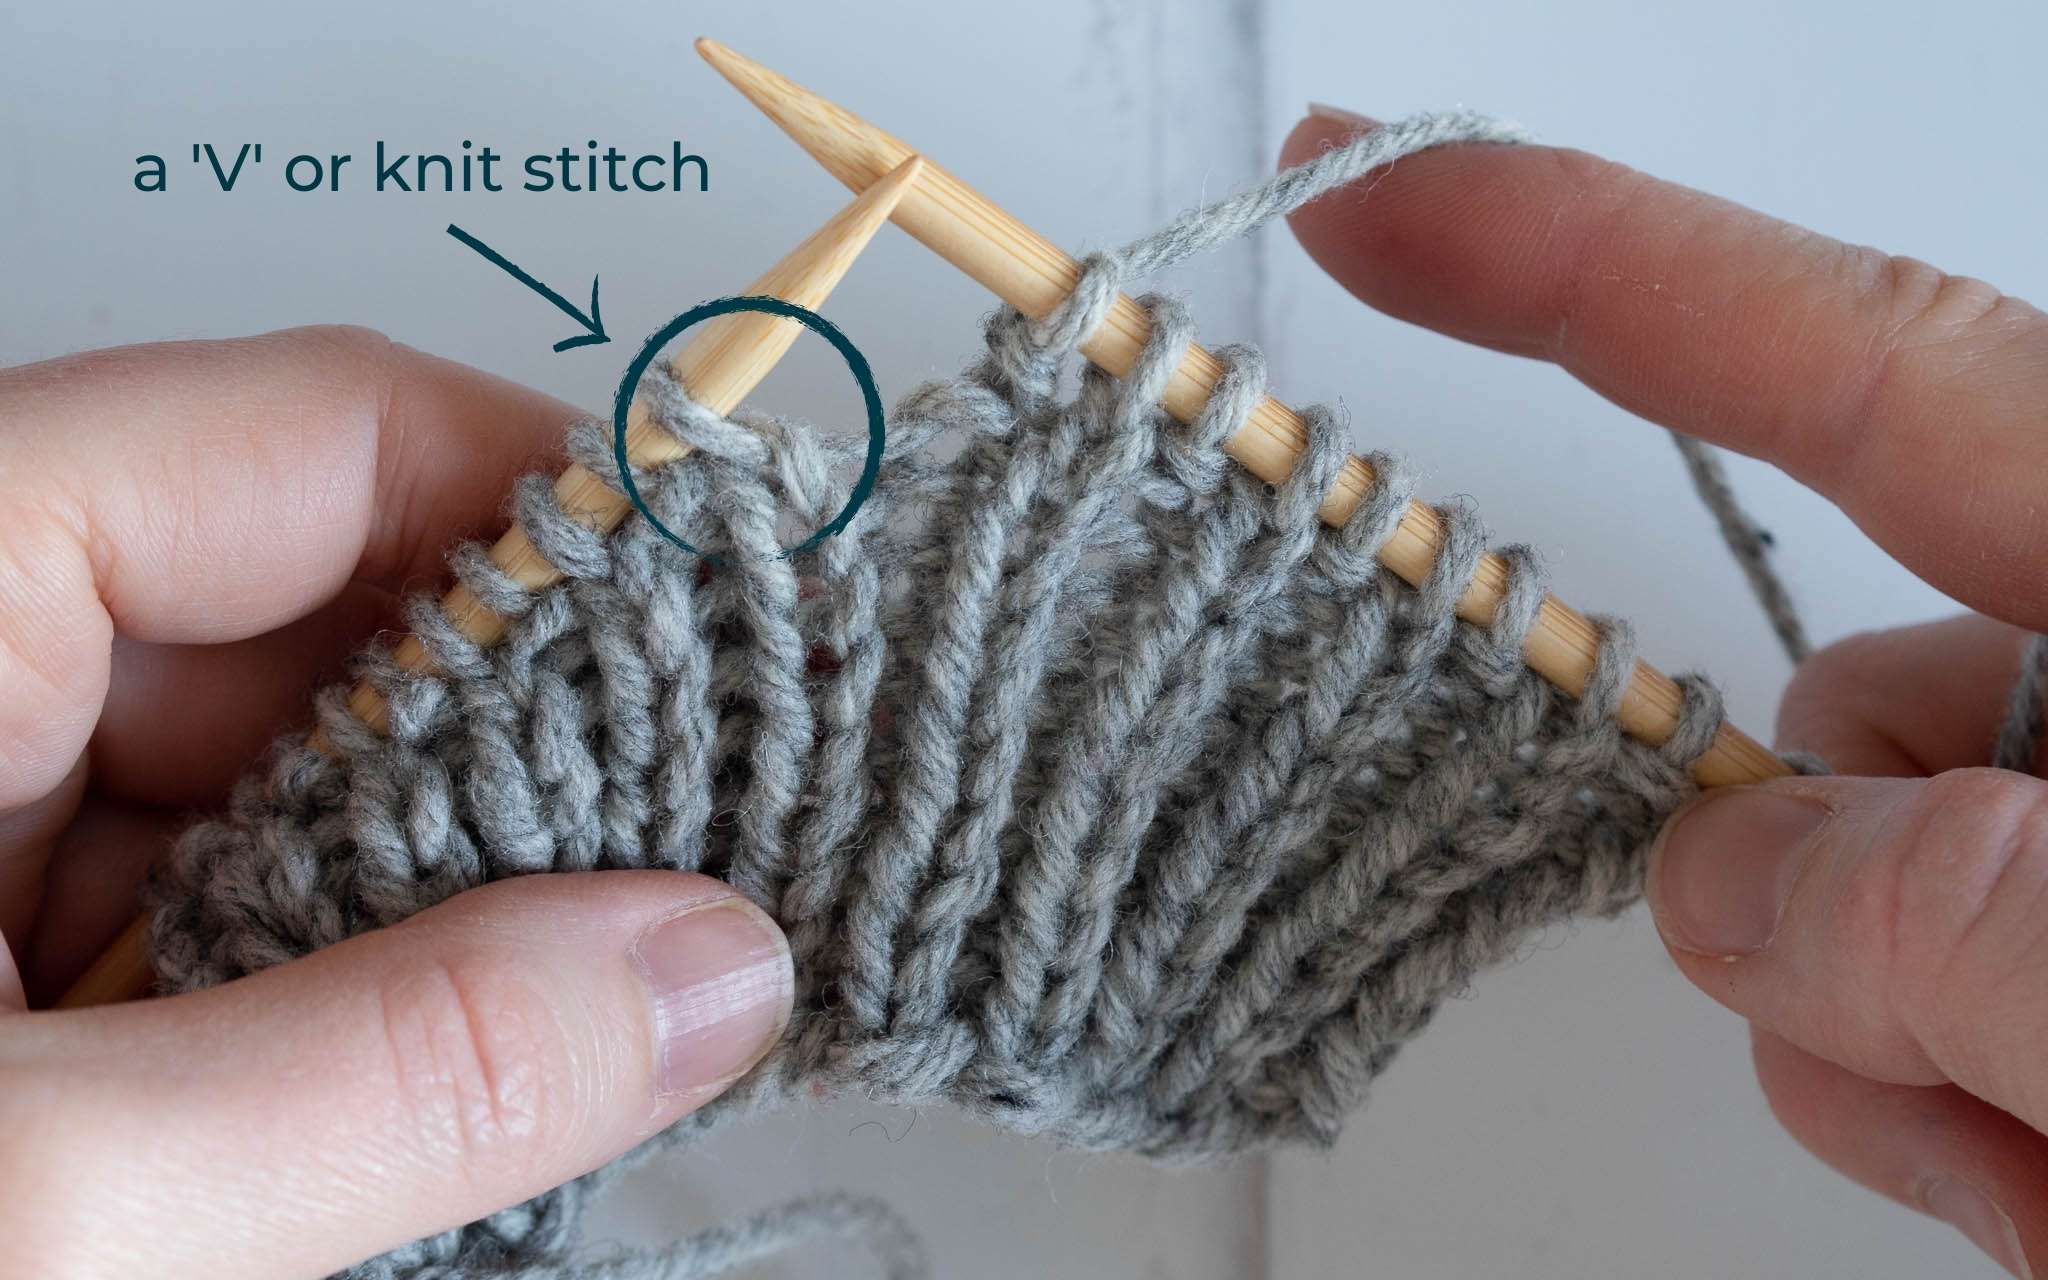 a grey swatch in a ribbing pattern, showing the next stitch to be worked as labelled 'a 'V' or knit stitch'